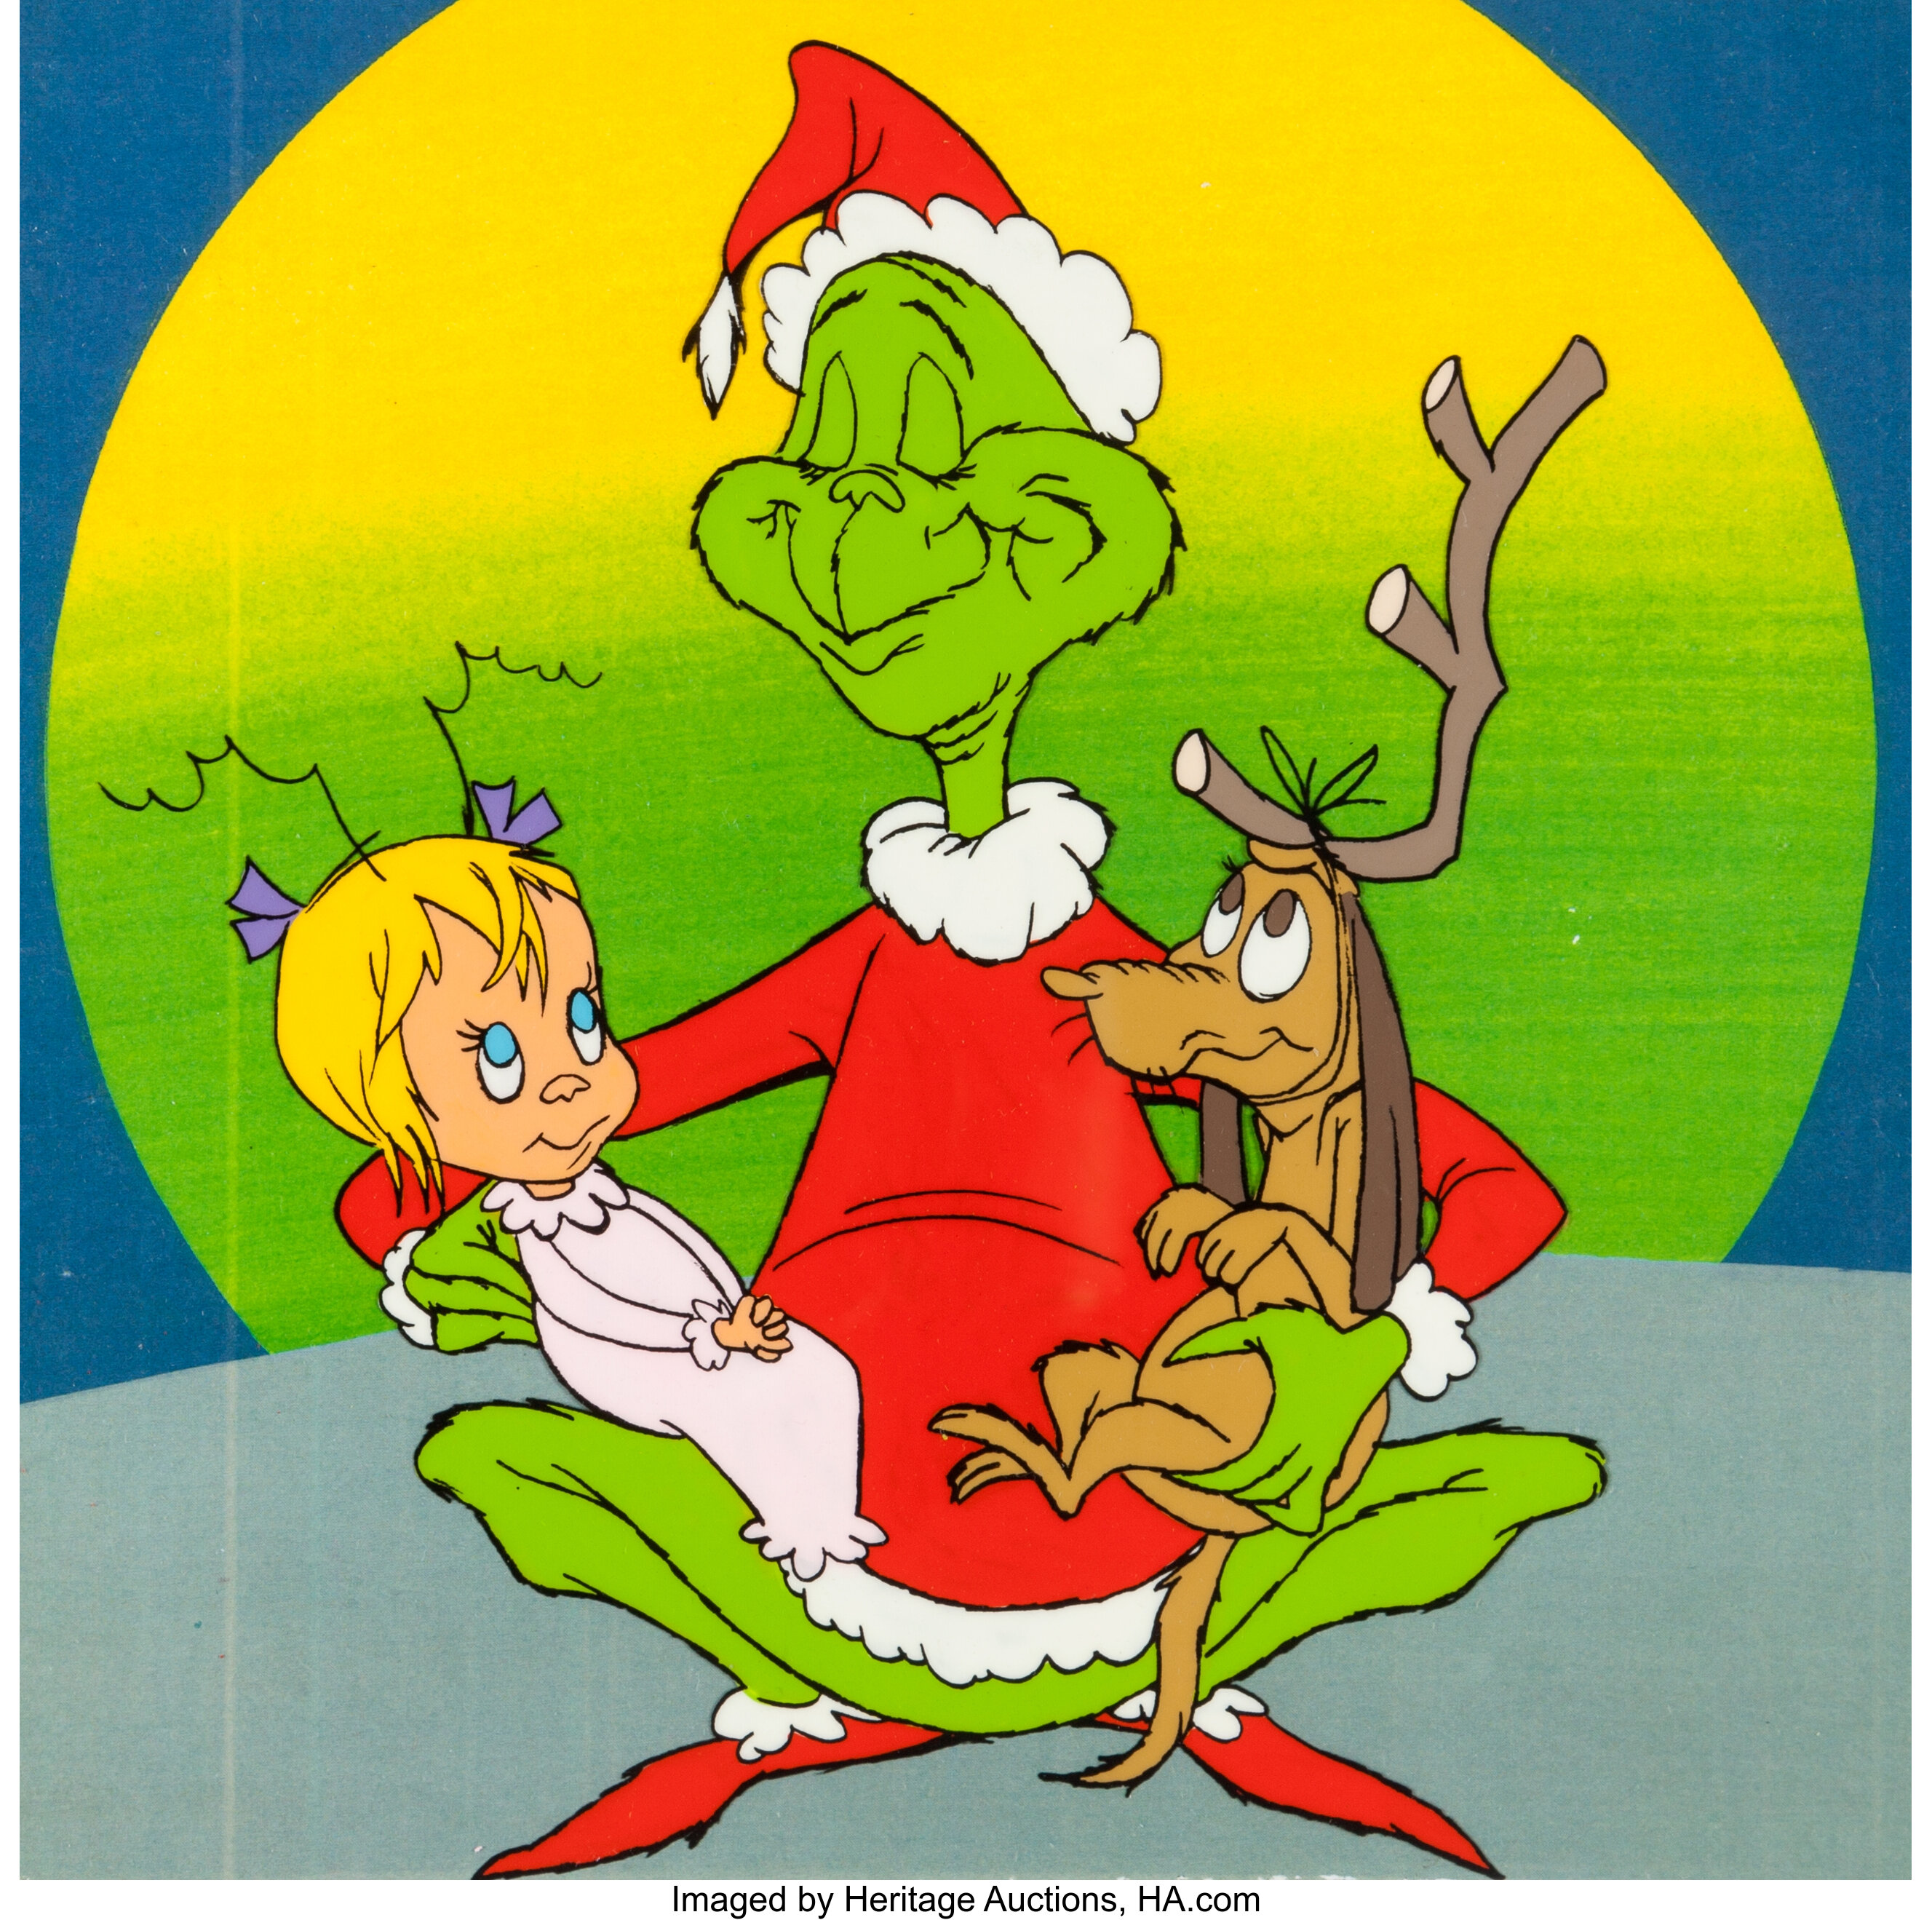 2022 Grinch Who Stole Christmas Max And Cindy Lou Who 13